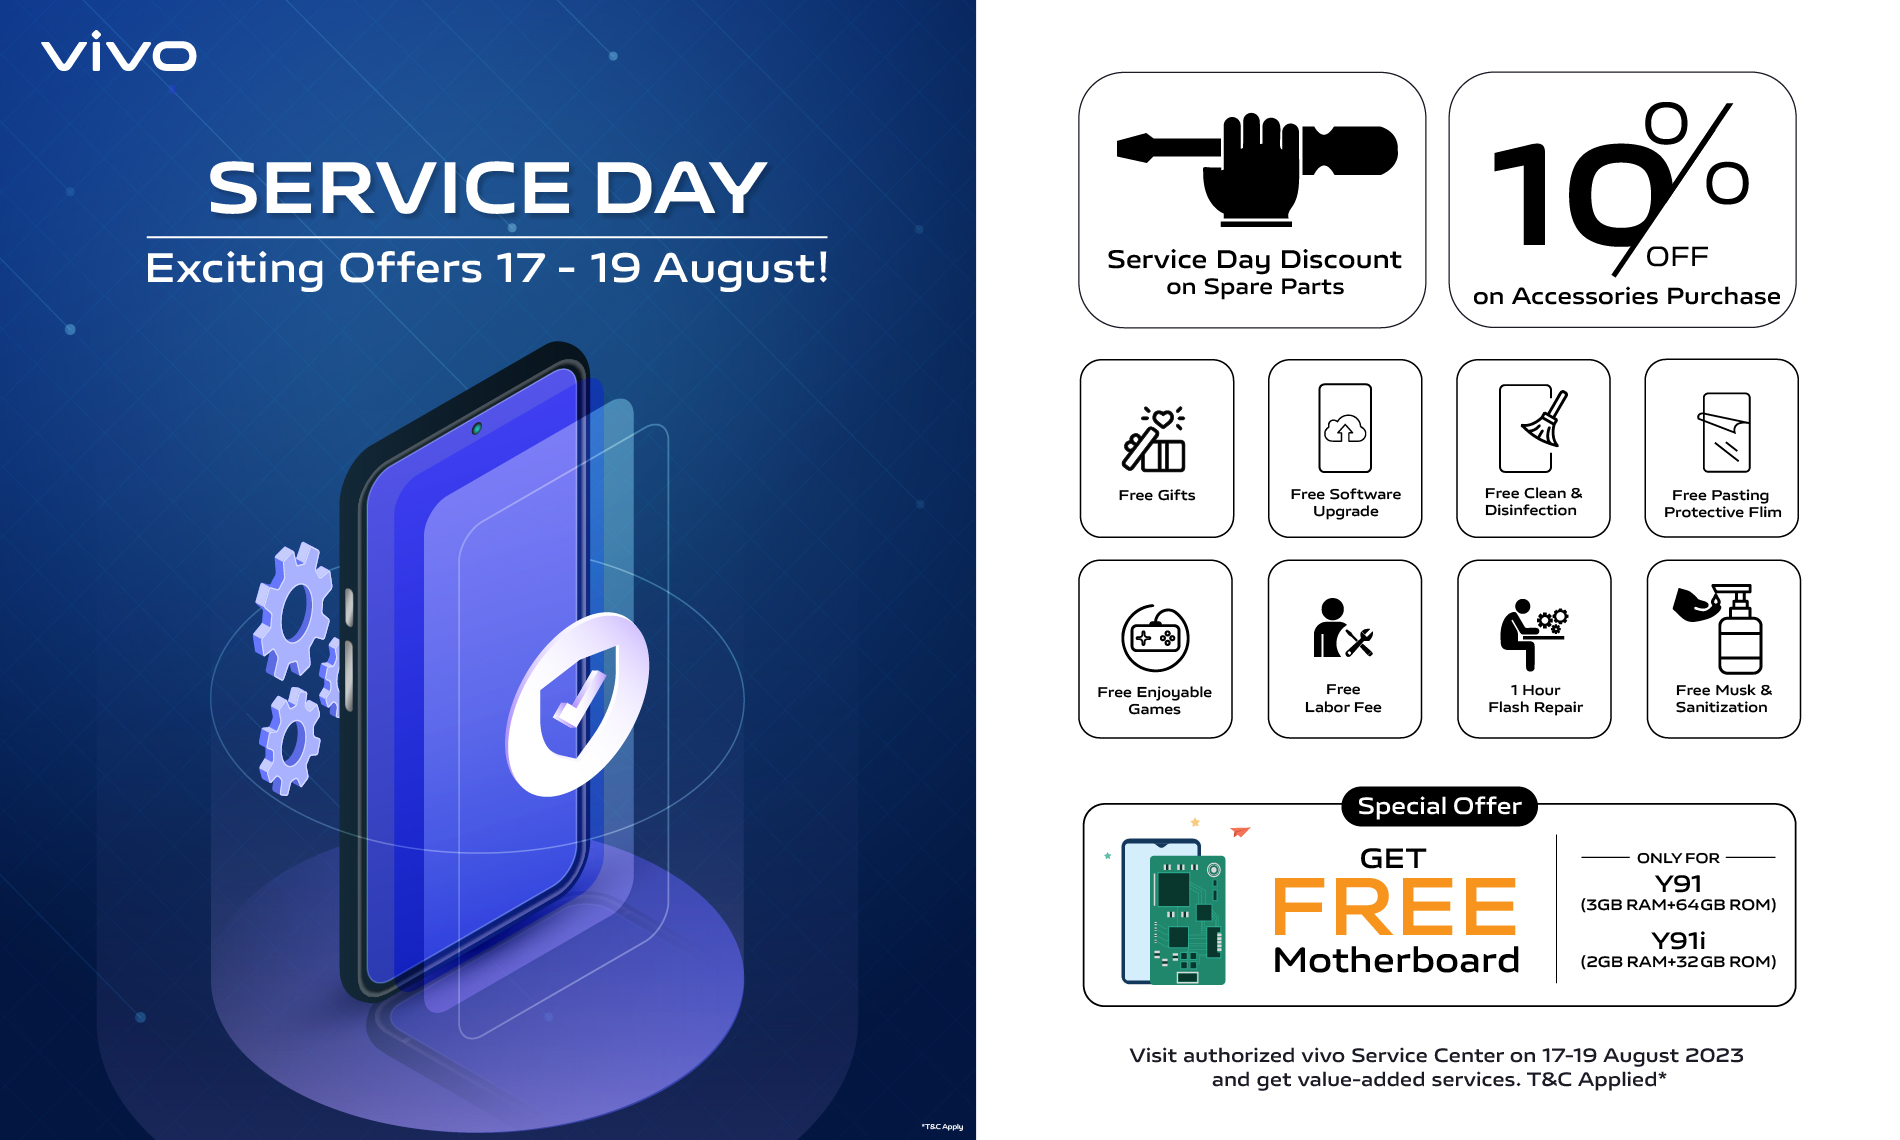 Exciting vivo SERVICE DAY with Special Offers